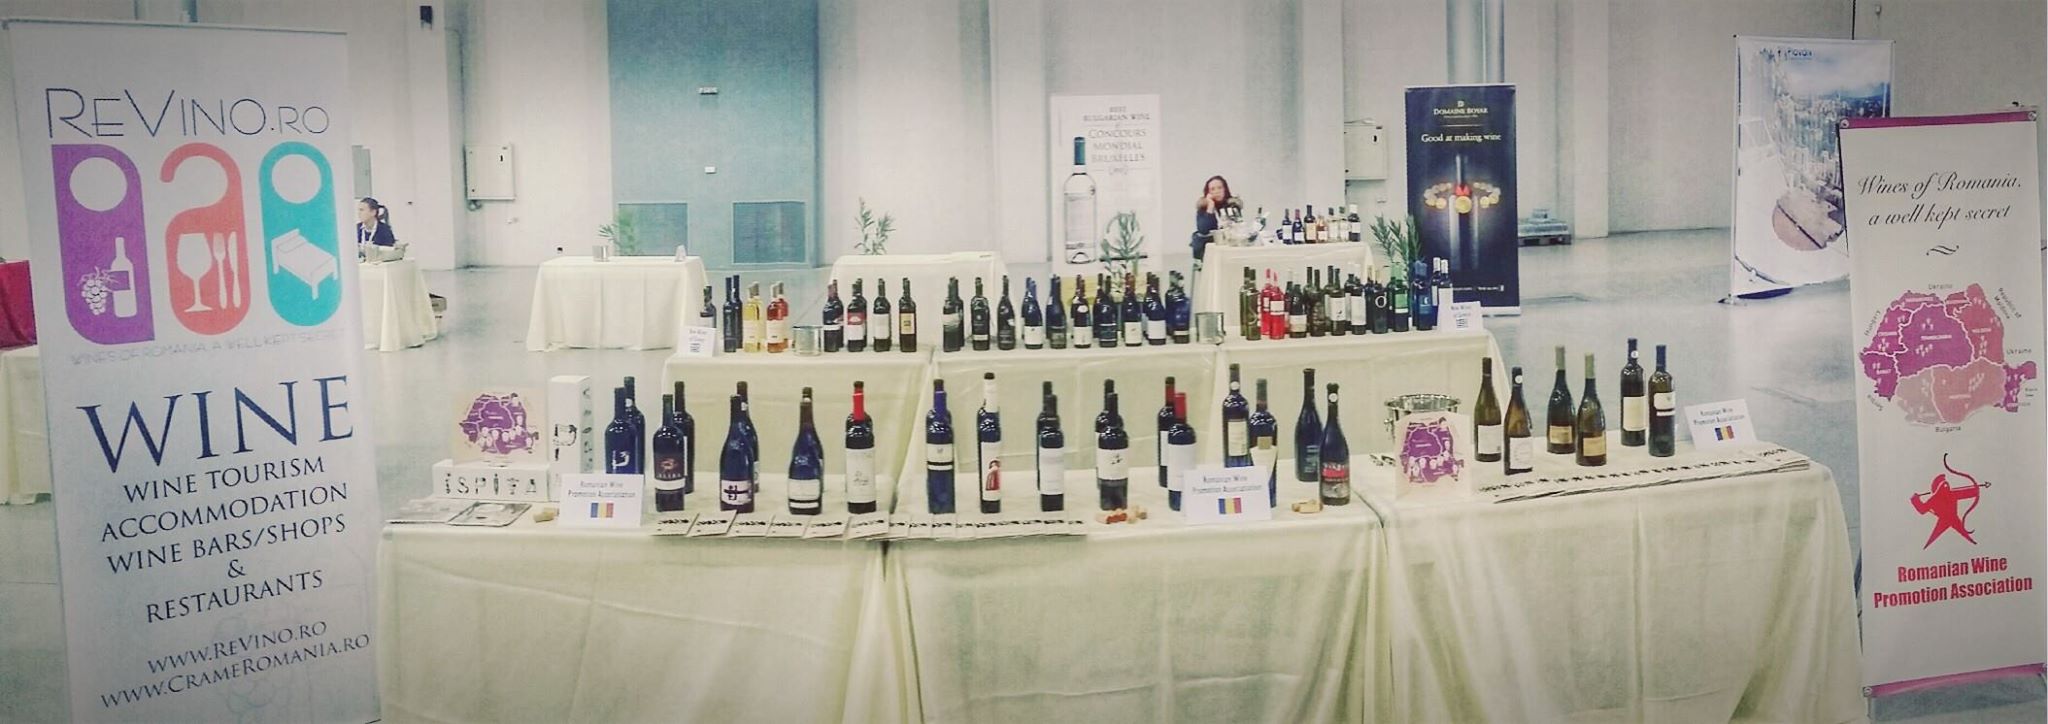 Romania's wine booth at the DWCC exhibition